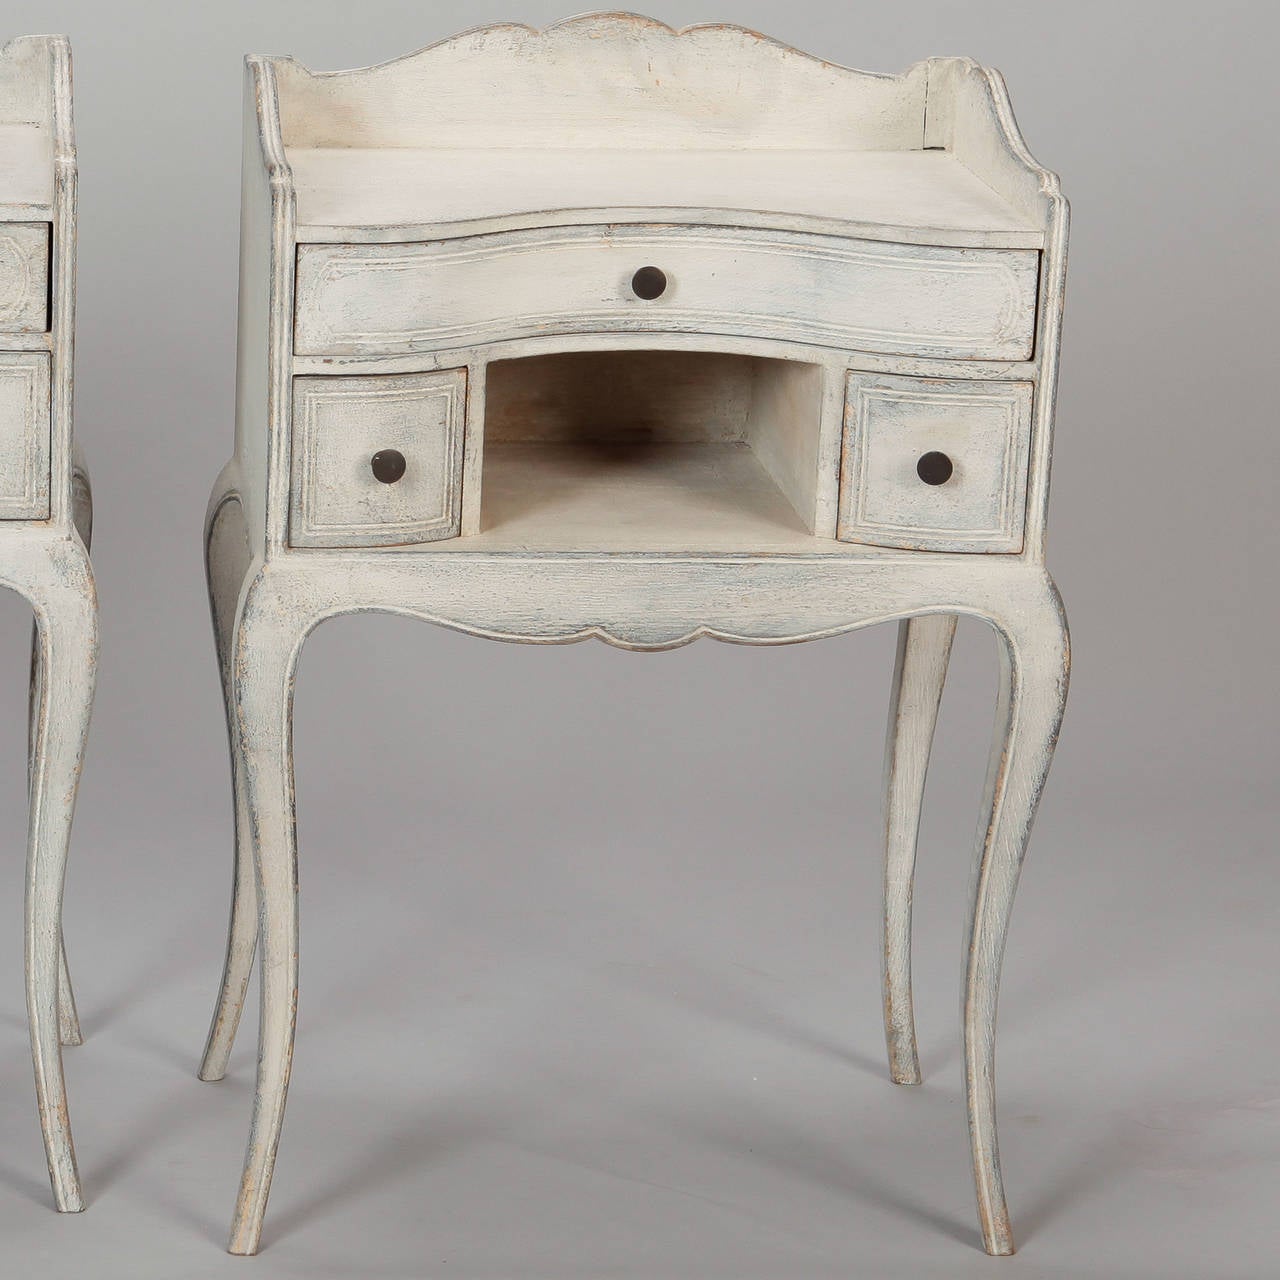 Painted Pair of French Antique White Bedside Tables